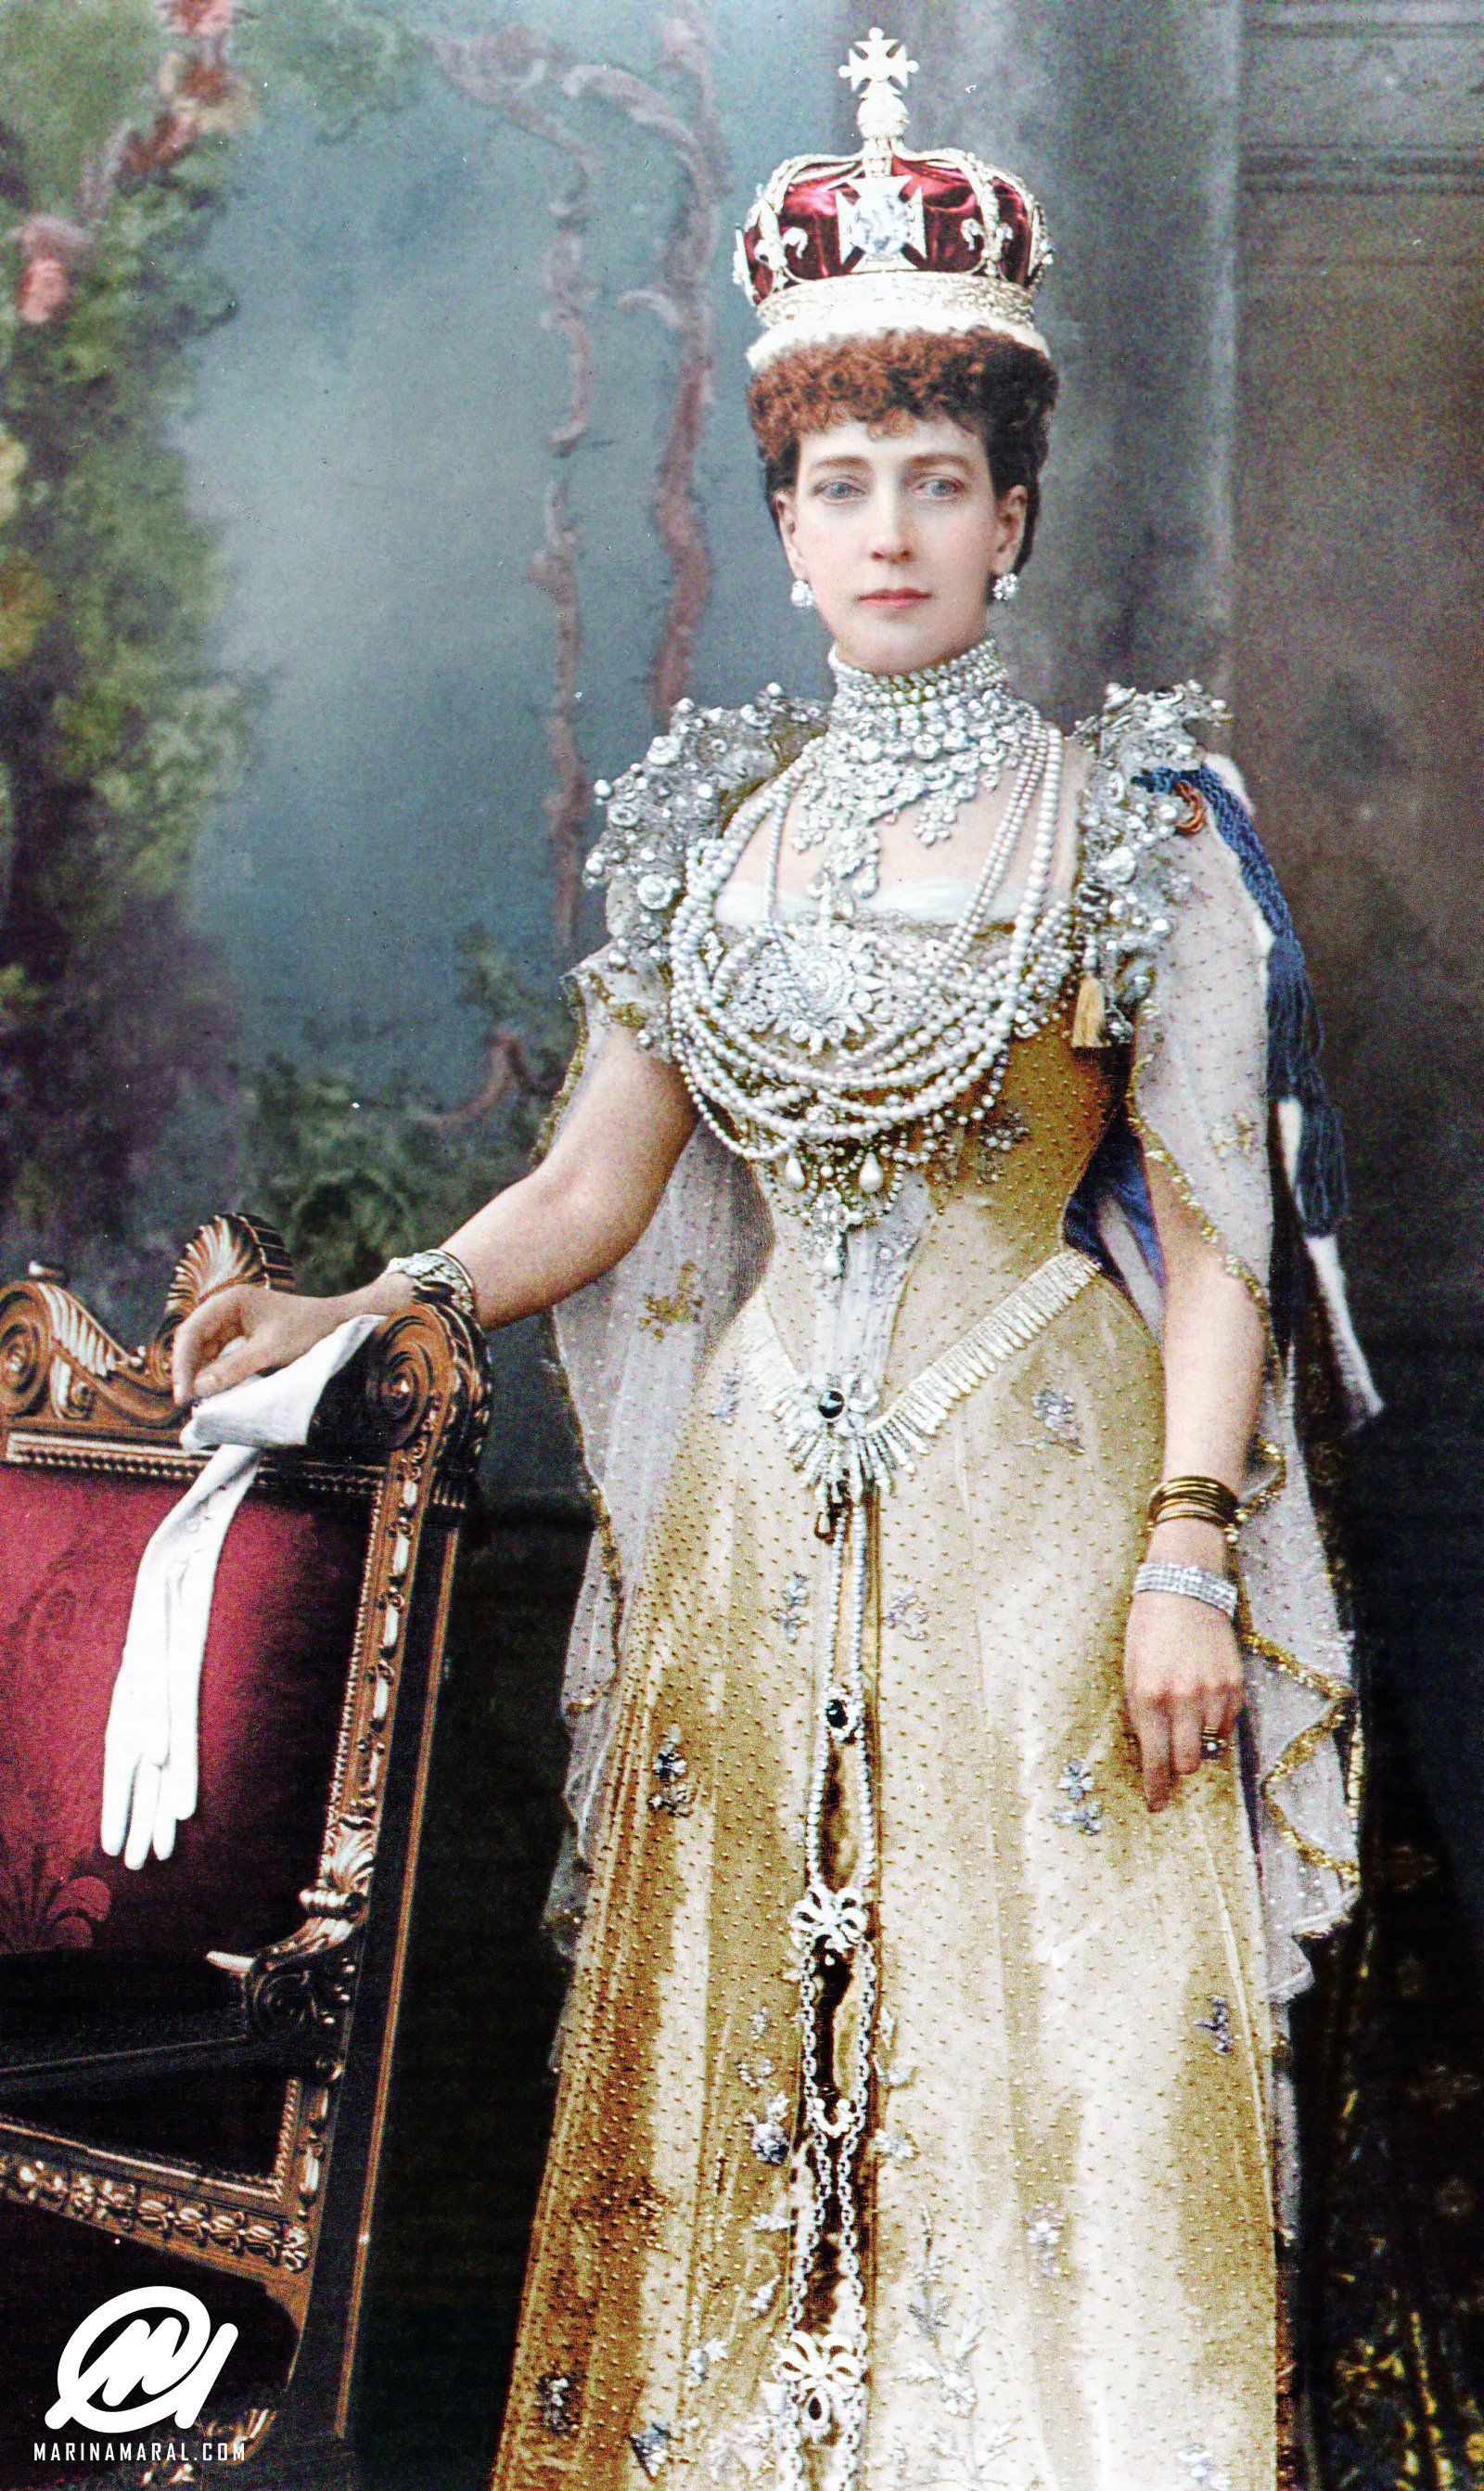 Queen Alexandra wearing the Dagmar cross (underneath those ropes of pearls) at the coronation in 1902.   